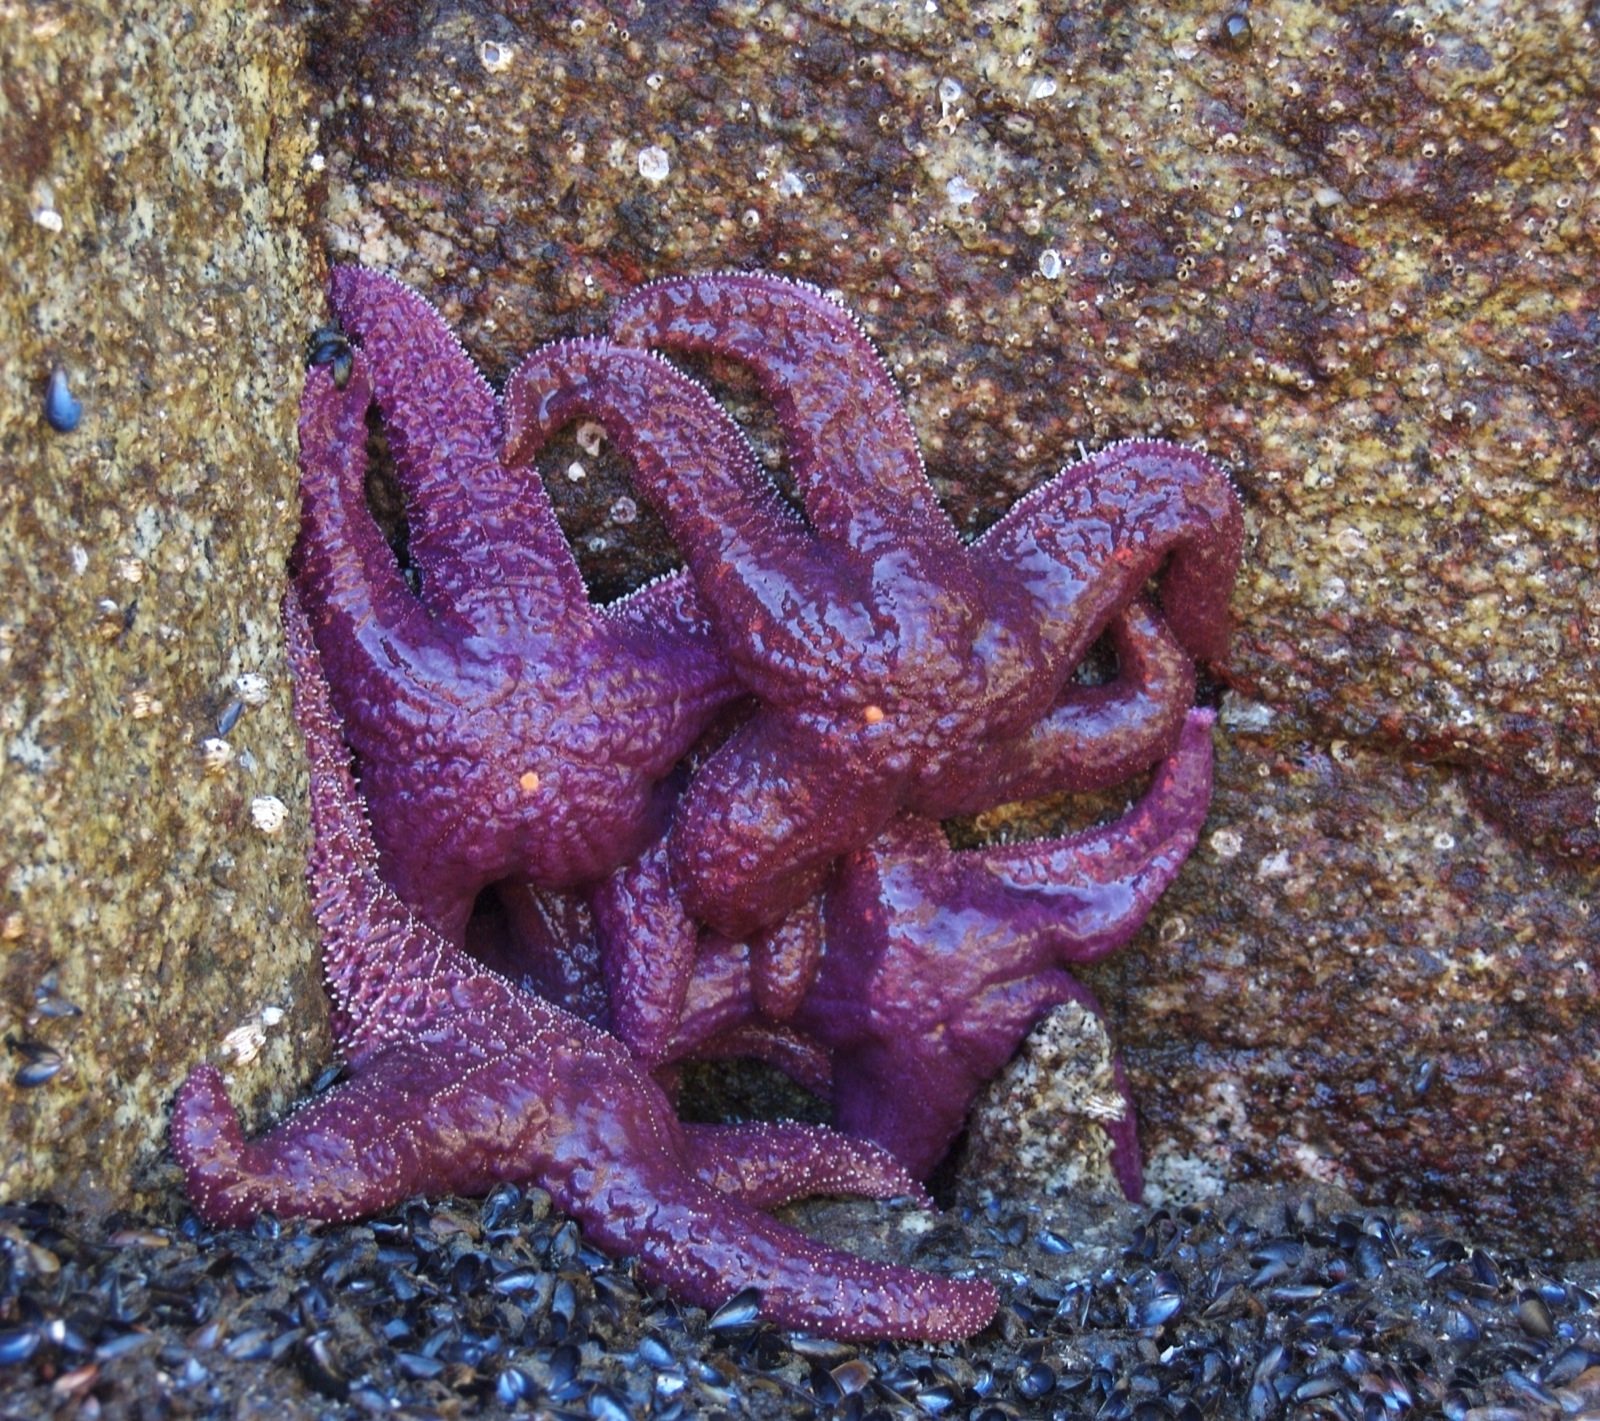 two purple pieces of coral are on the rock